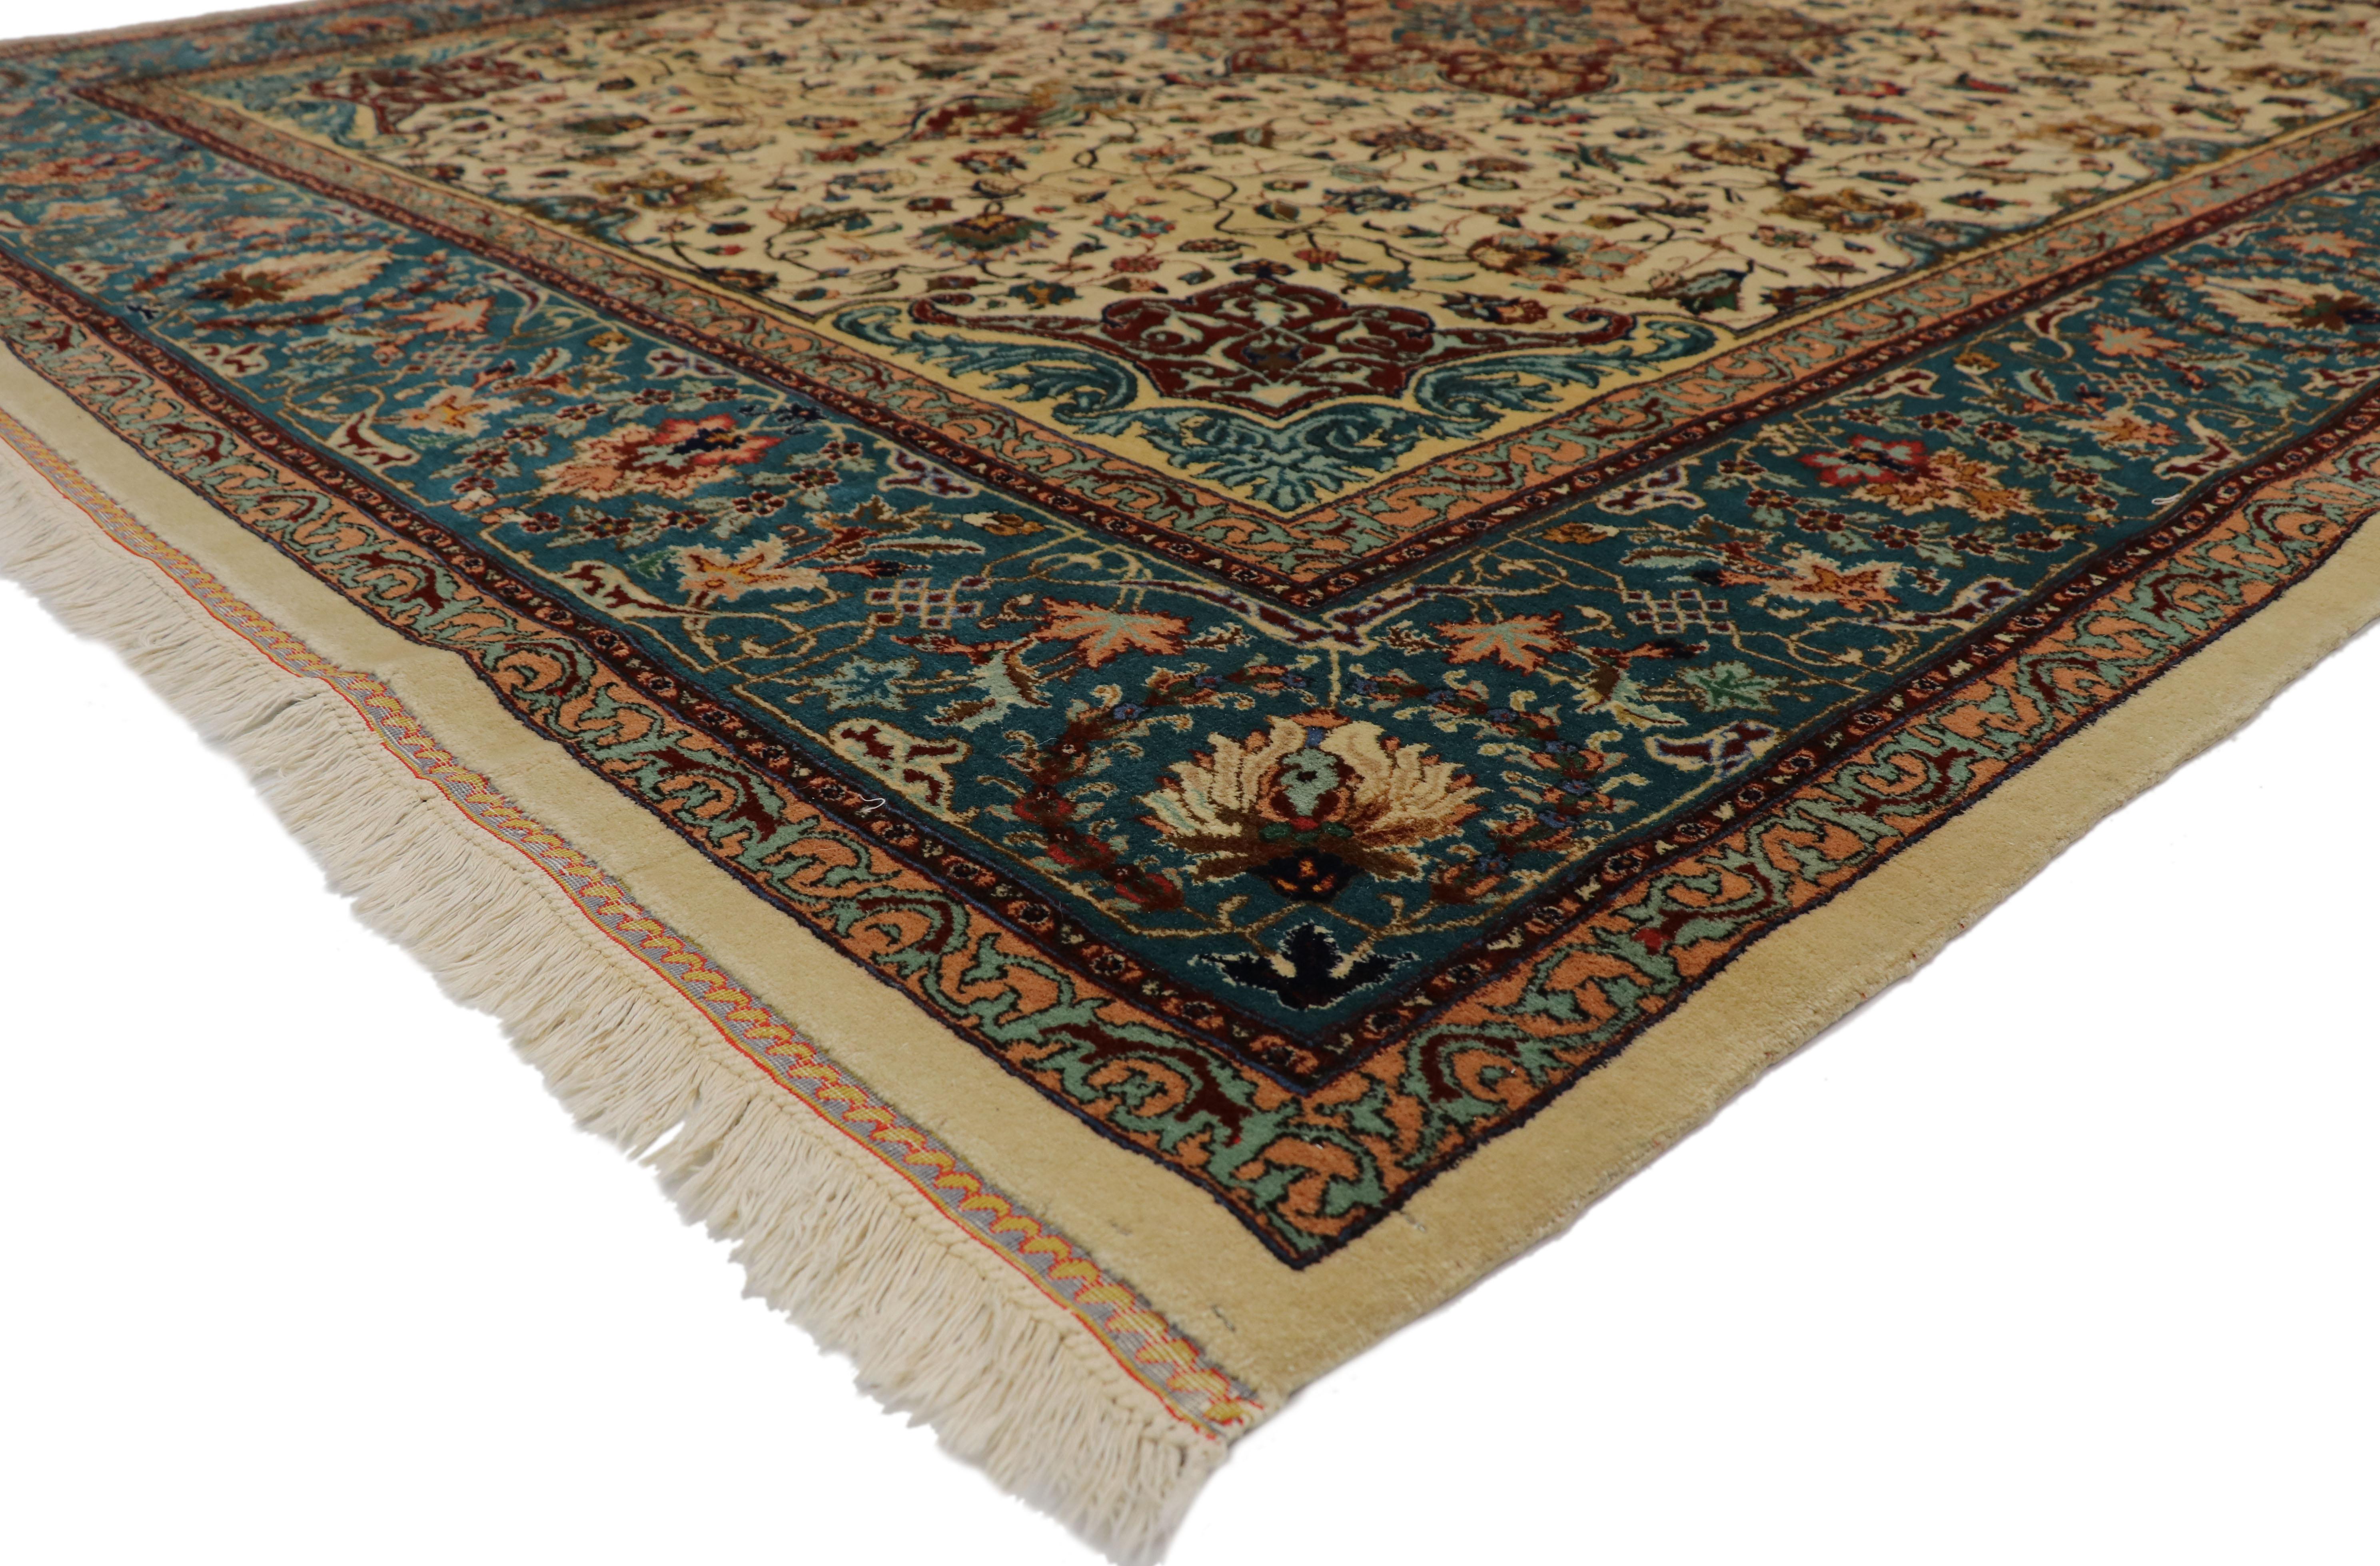 77352, Vintage Persian Tabriz Rug with Baroque Venetian Style 09'00 x 11'03. With it's rich colors and exotic glamour, this hand knotted wool vintage Persian Tabriz rug truly embodies Venetian style with a hint of Baroque. The vintage Persian rug